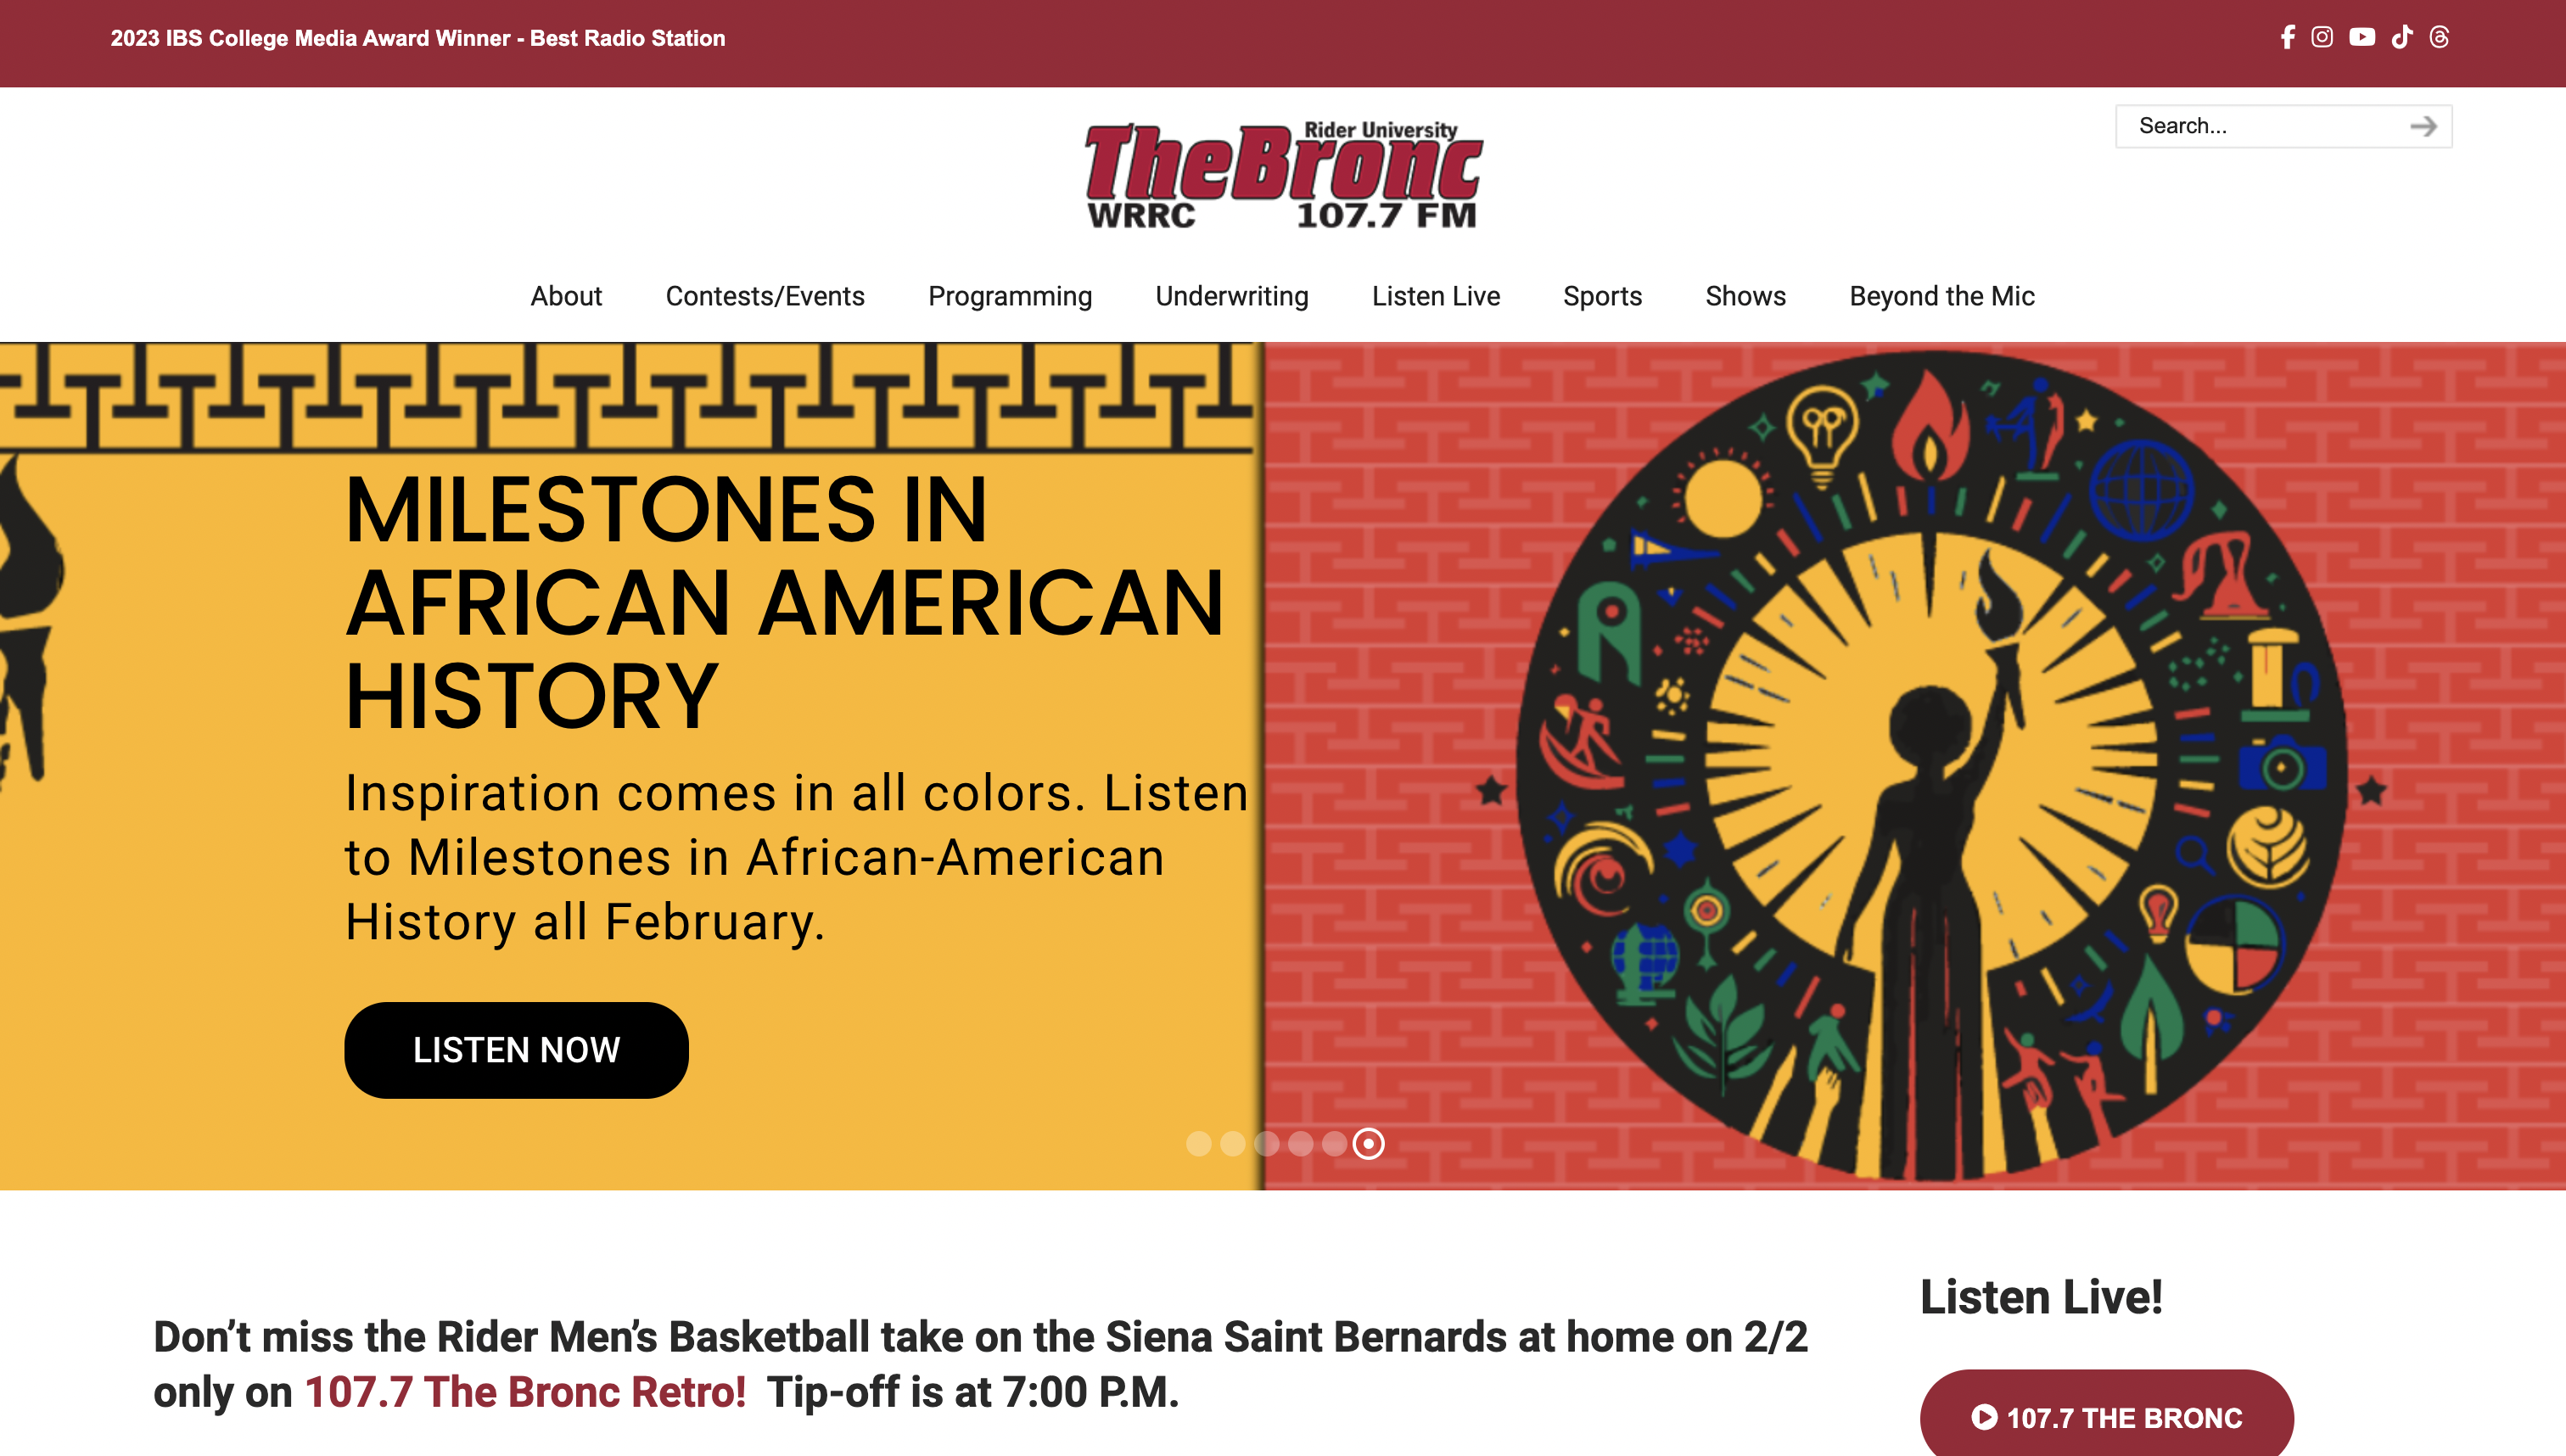 The new home page for 1077thebronc.com.